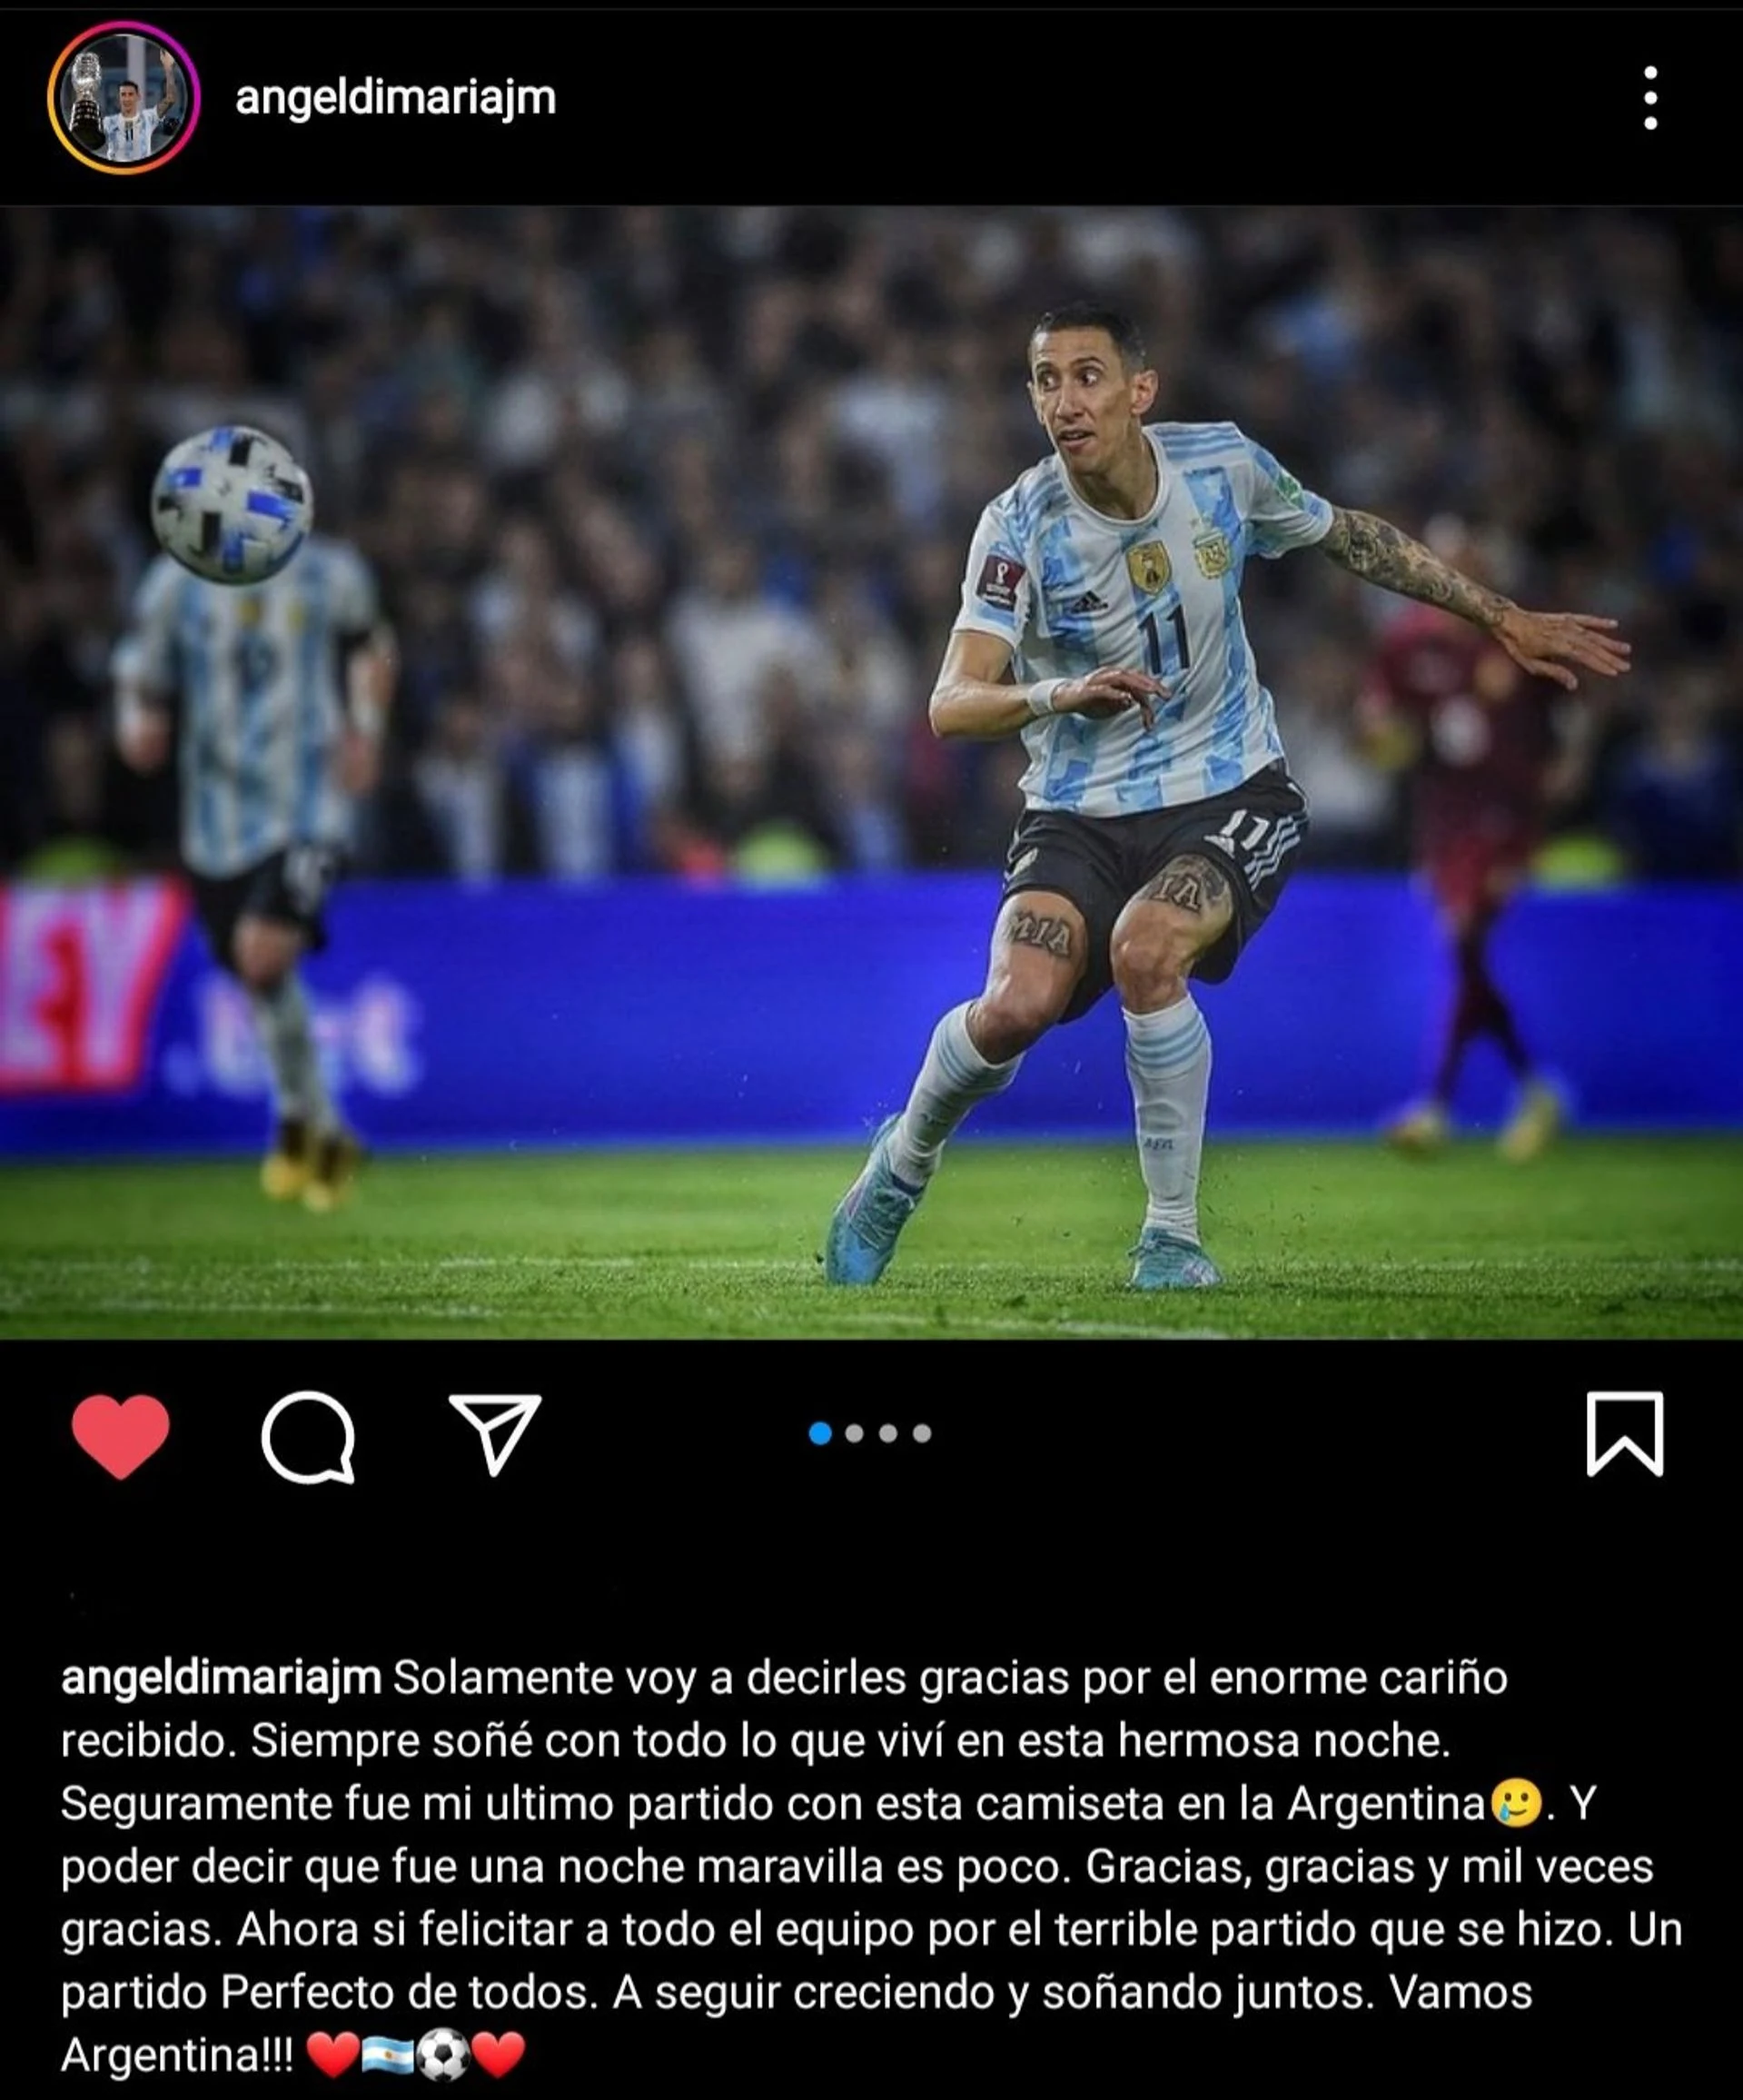 Angel di Maria hints at retirement after World Cup 2022